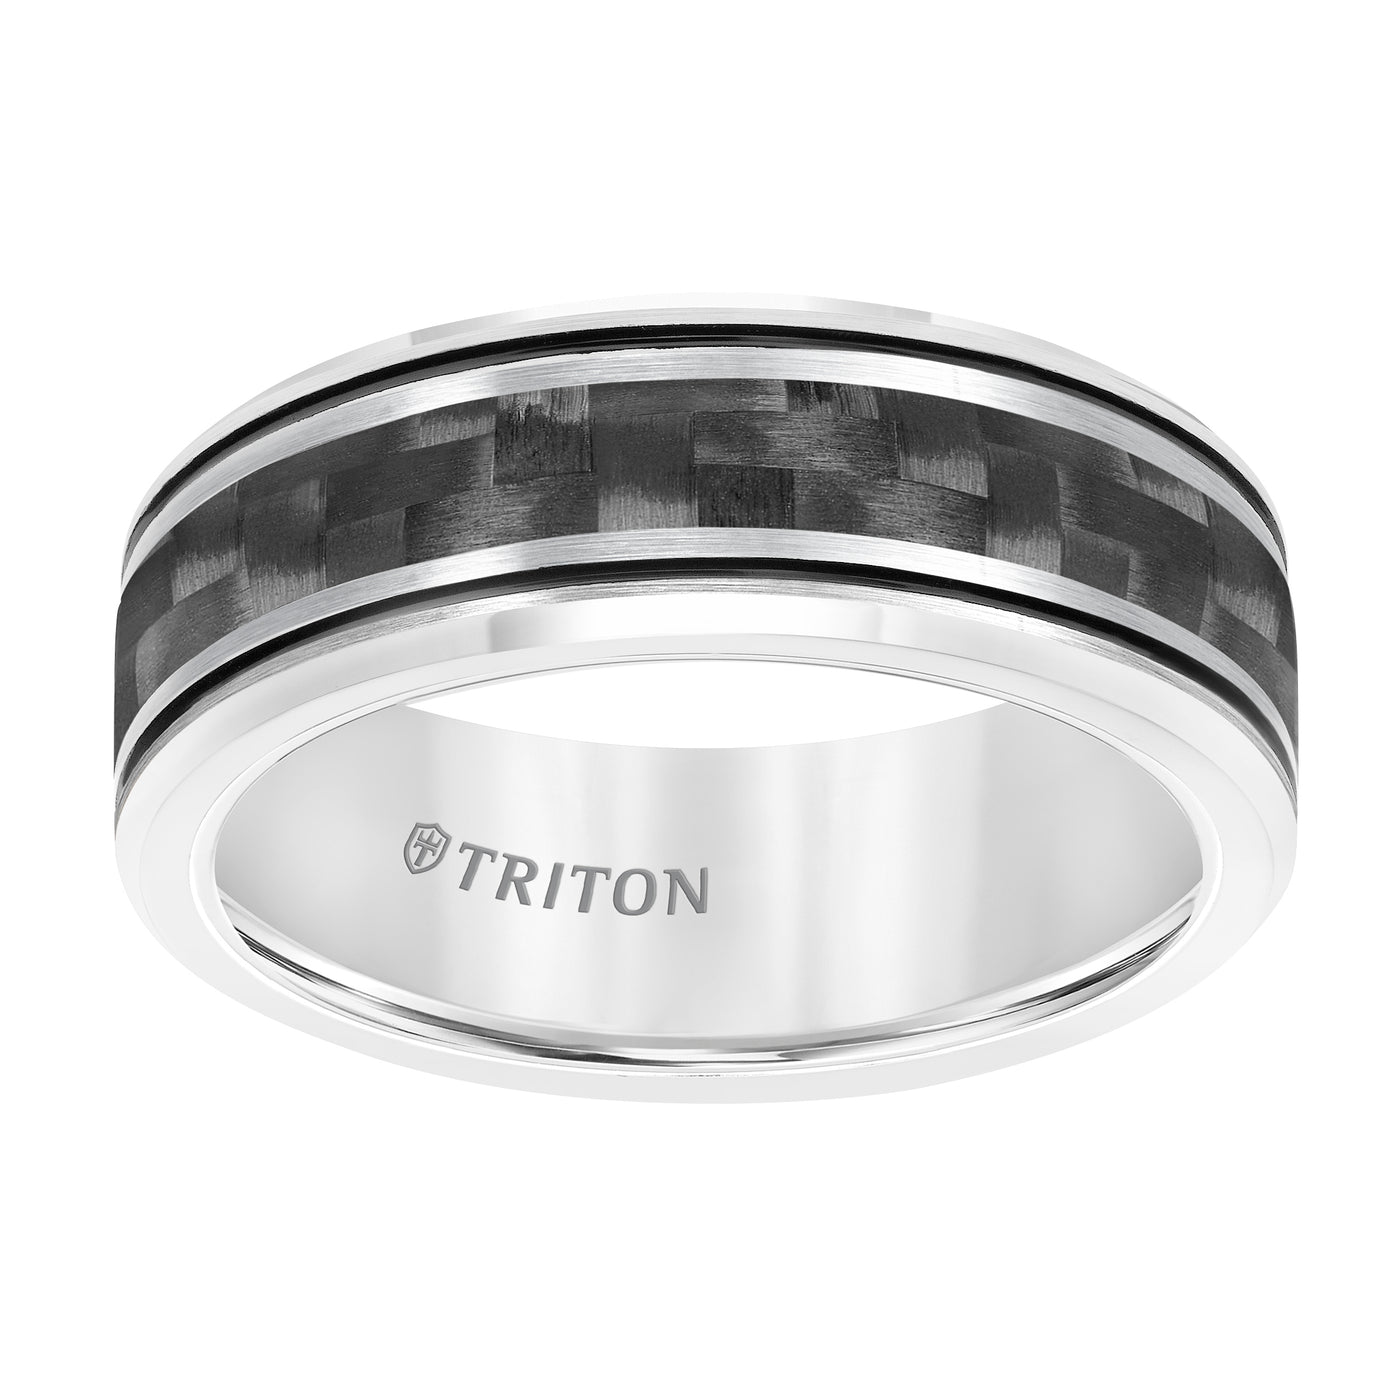 8MM Tungsten Carbide Band with Carbon Fiber Insert, Midnight Black Stripes and Beveled Edge